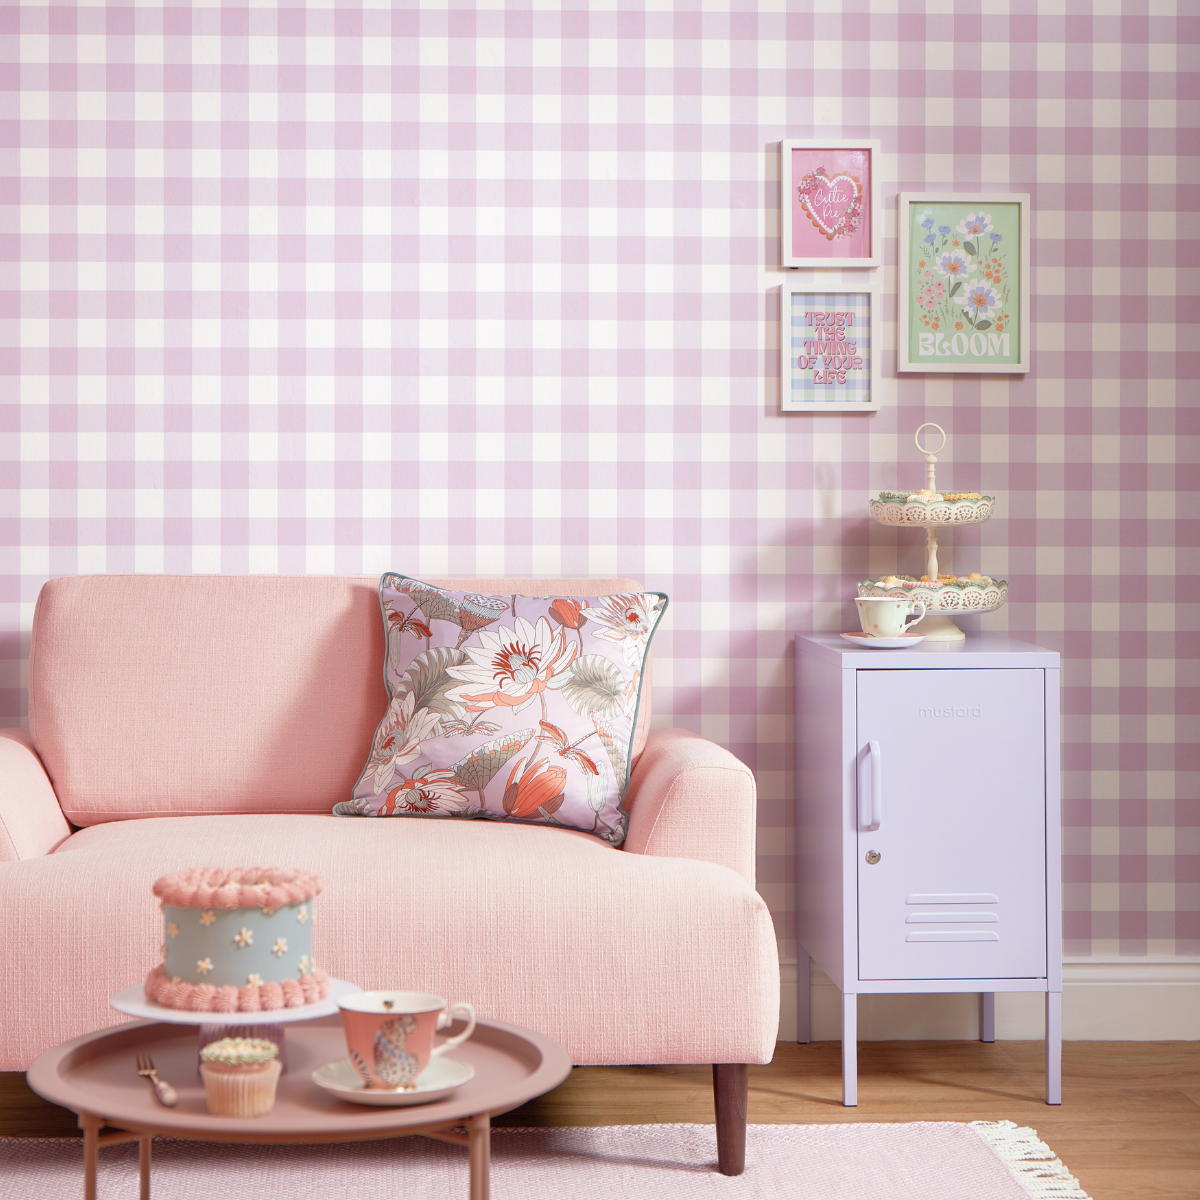 A Lilac Shorty sits in a pastel themed room with lilac gingham wallpaper and a blush couch. There is a vintage style tea party setup on the coffee table.